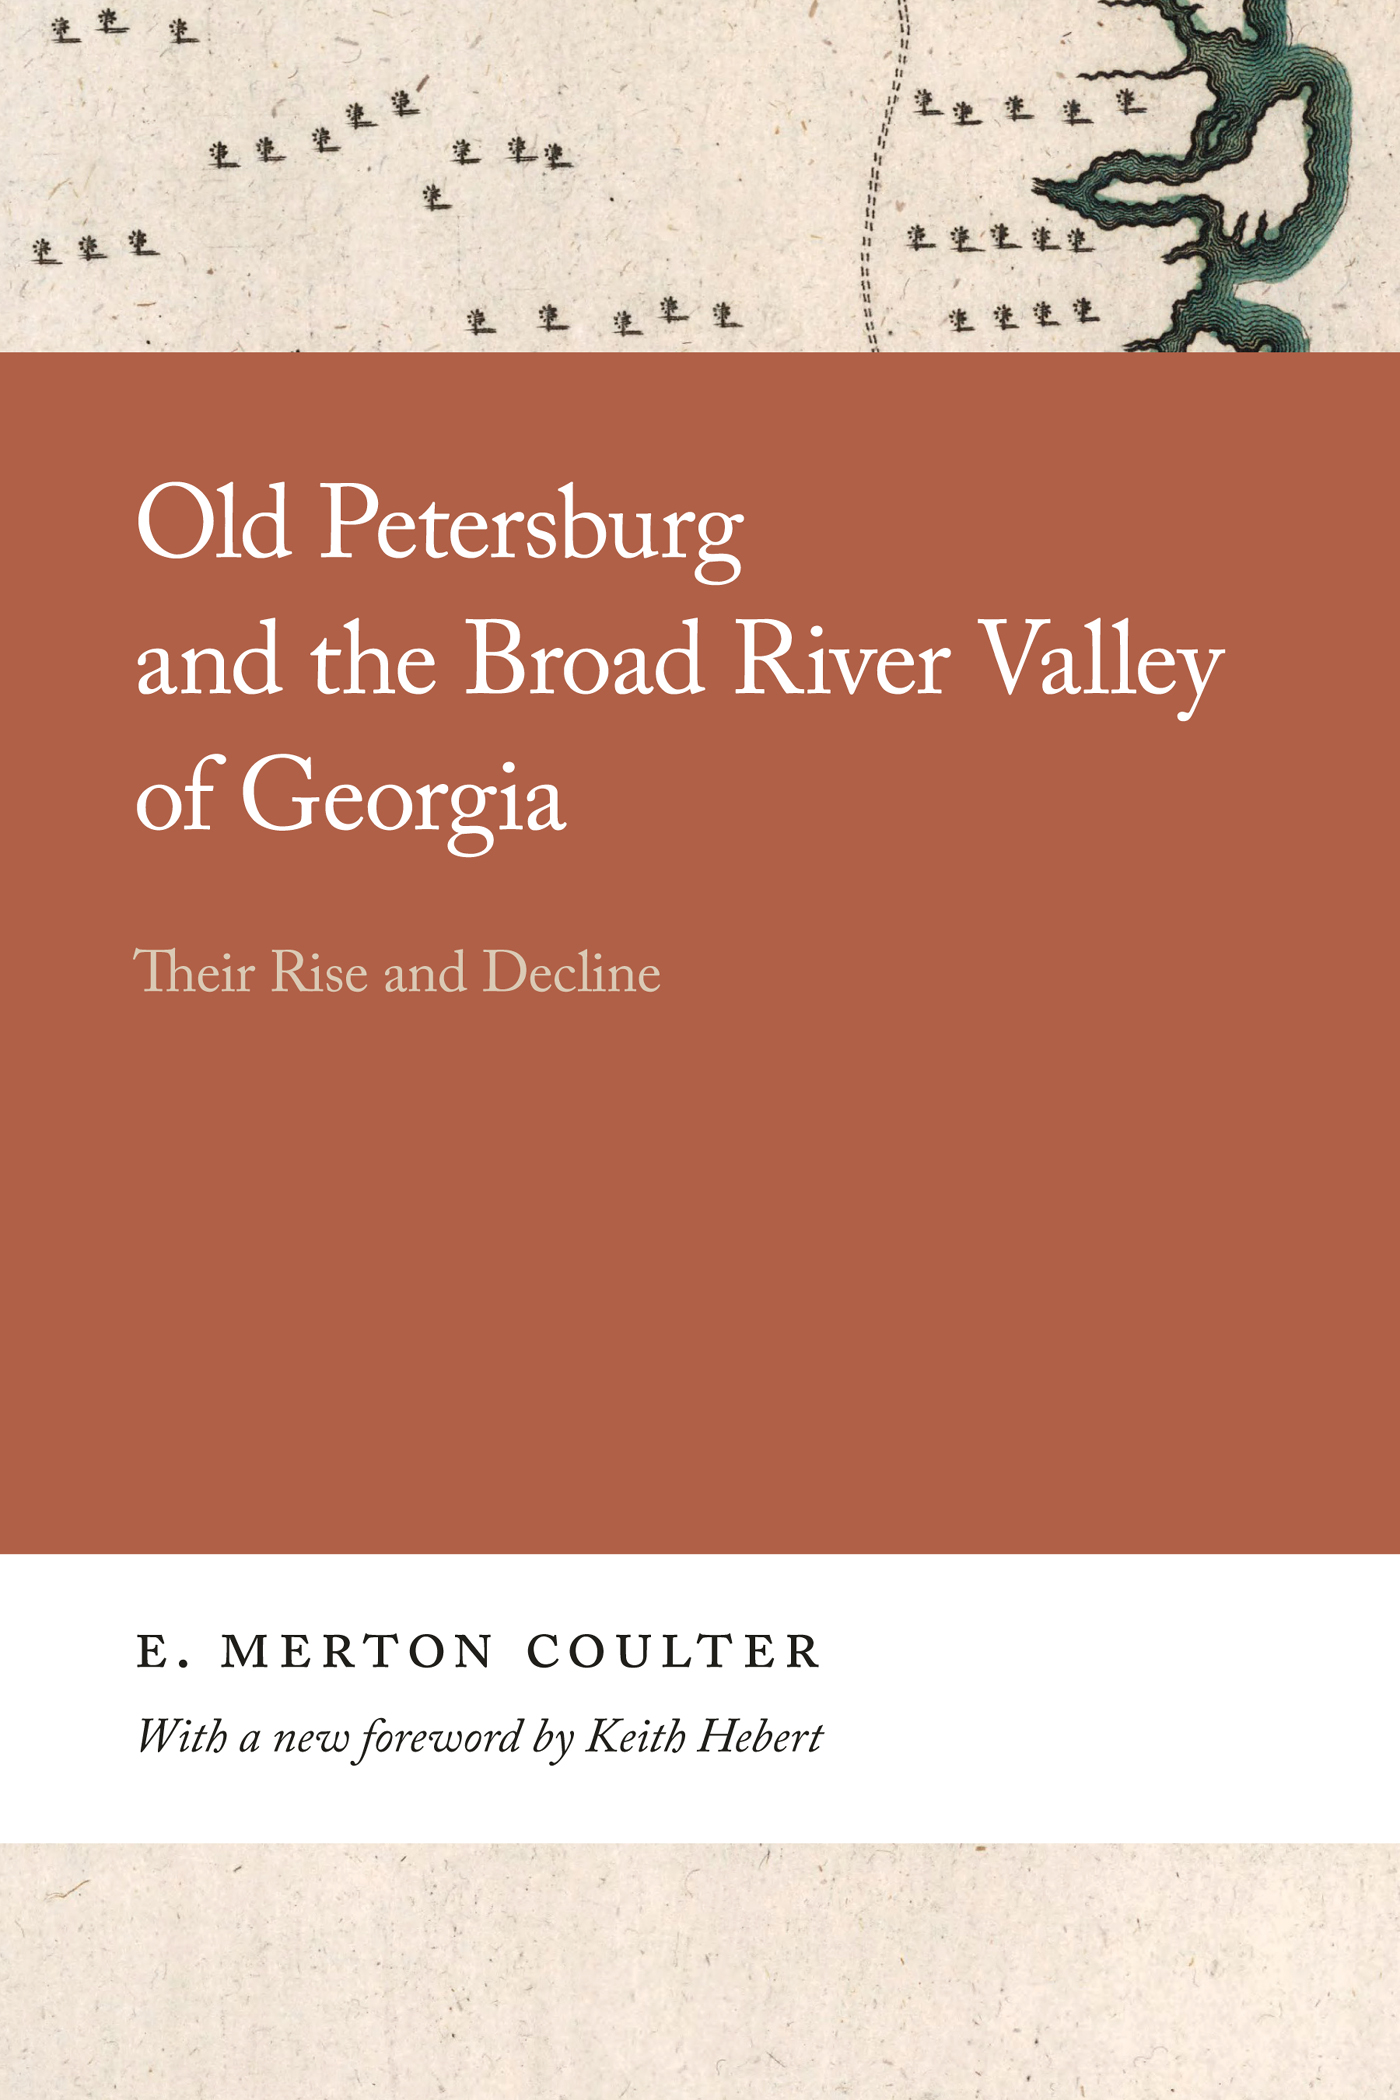 Cover page of the book “Old Petersburg and the Broad River Valley of Georgia.”